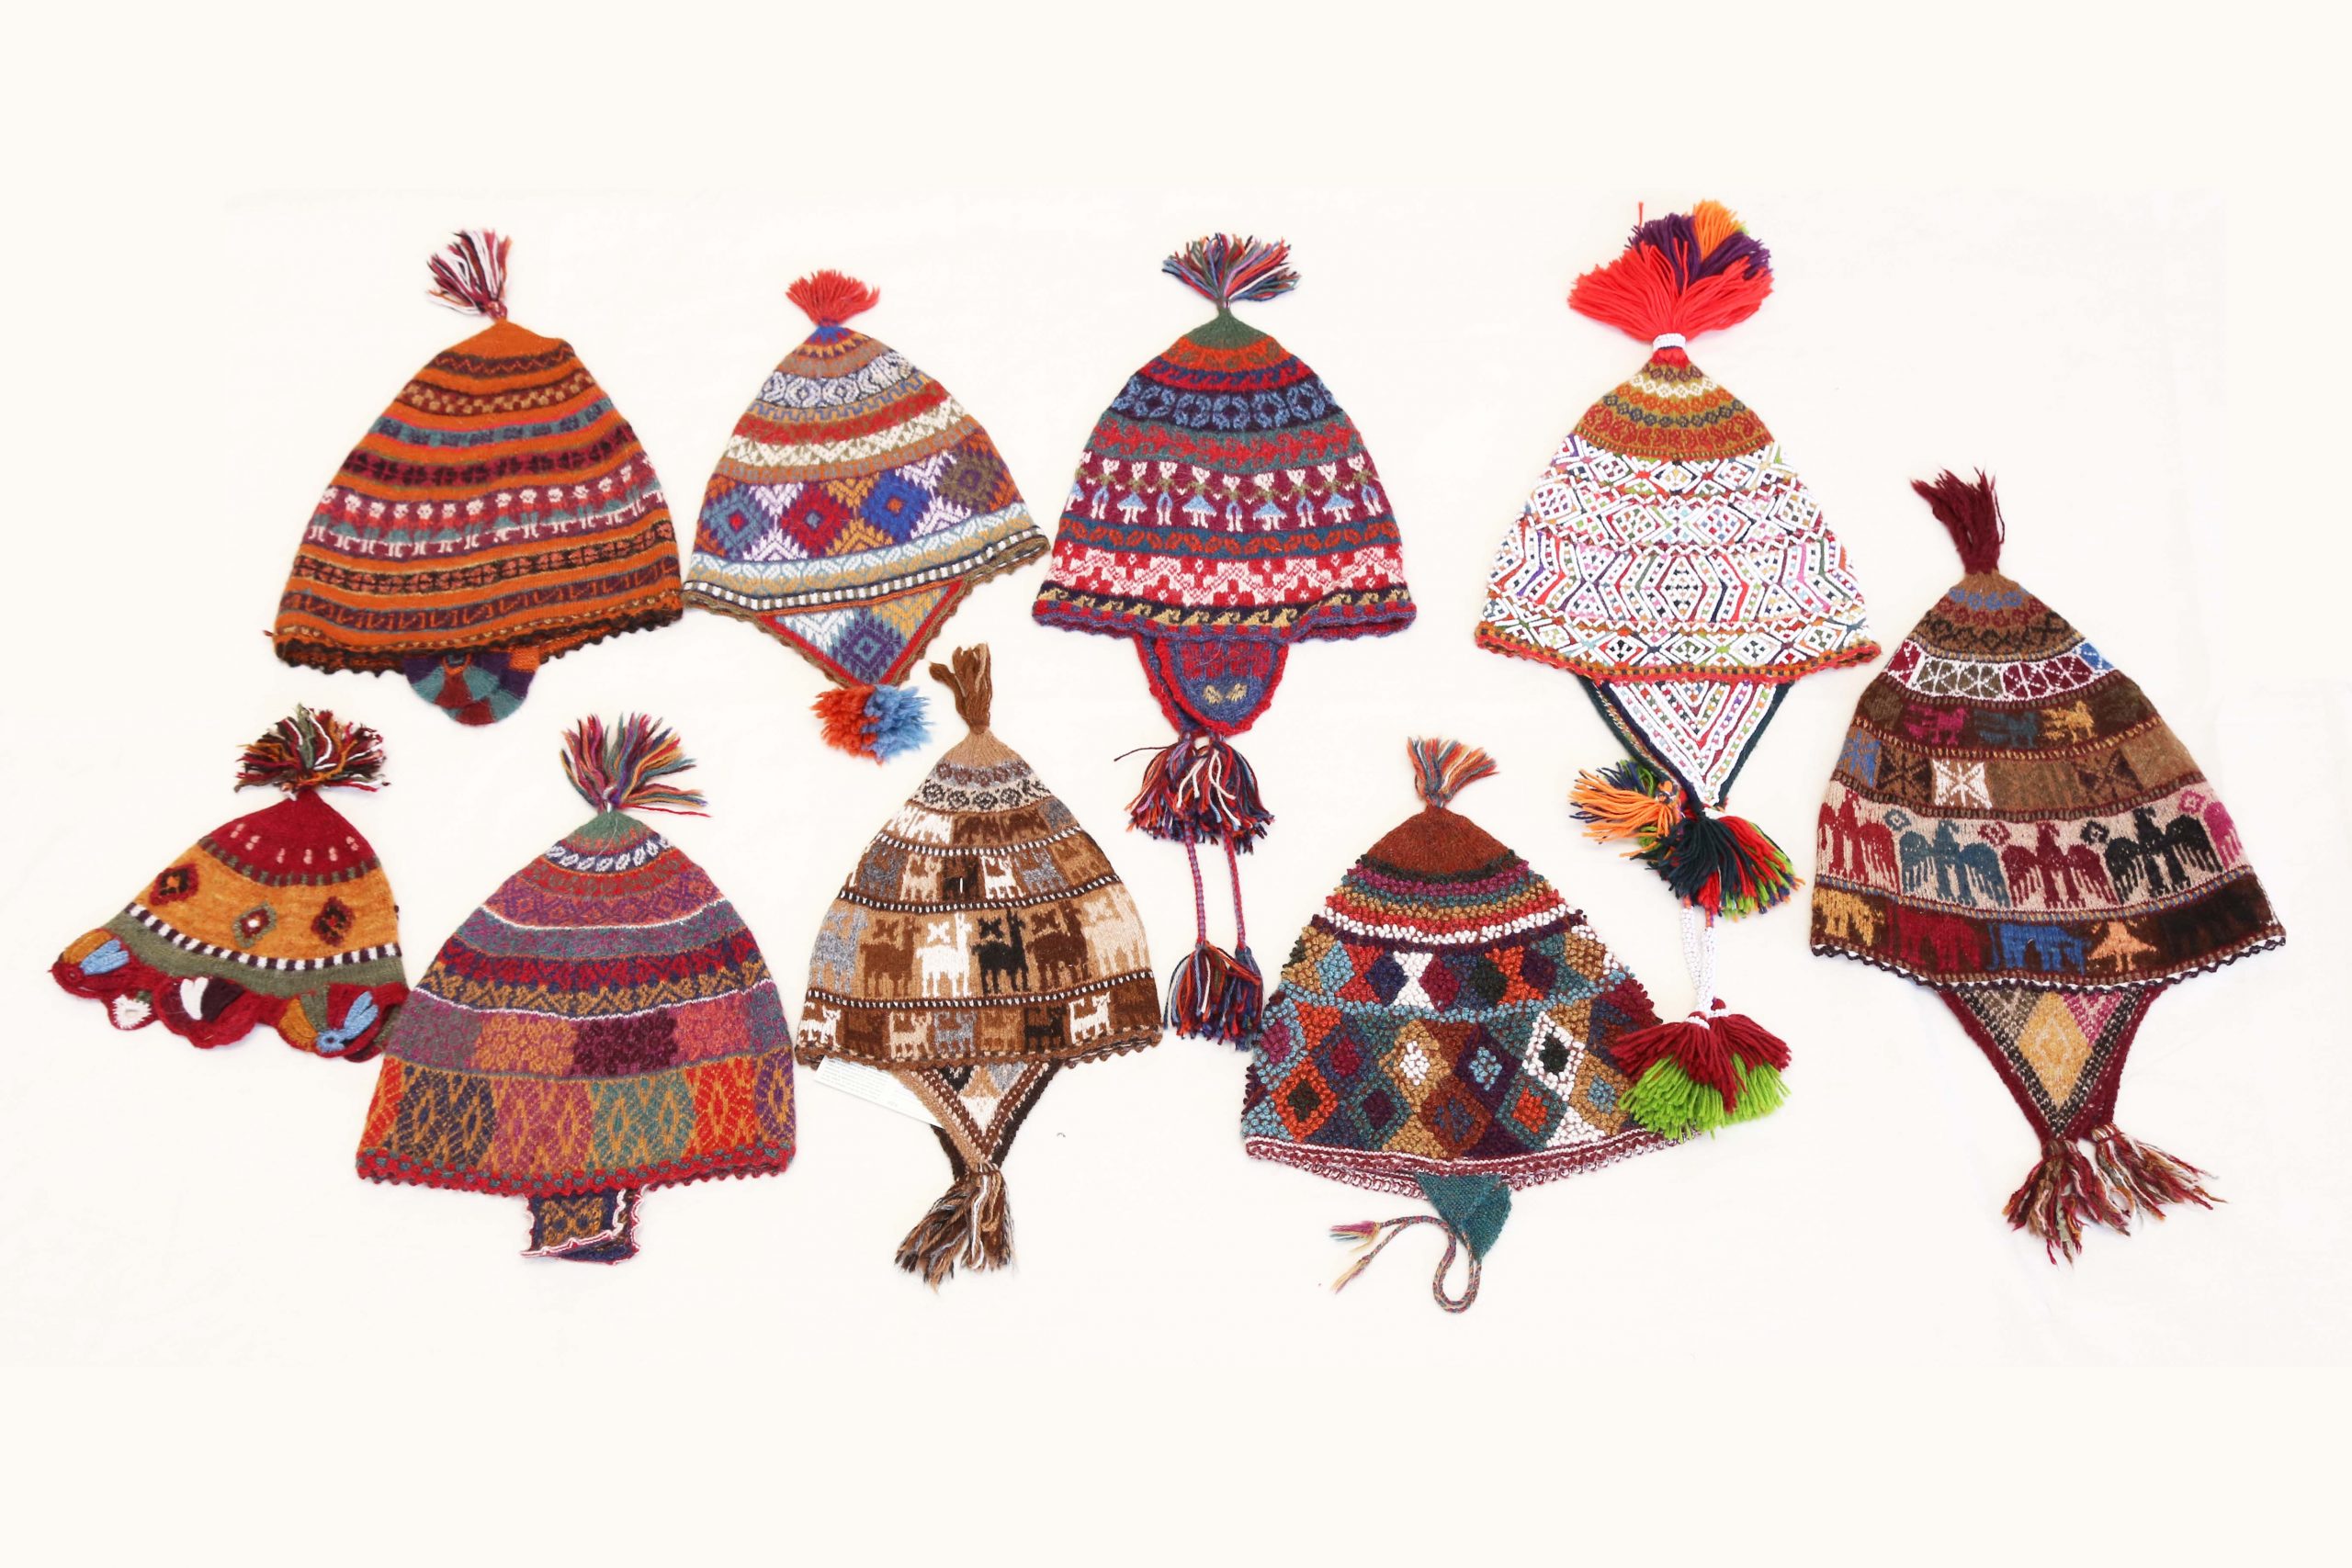 Knited Hats